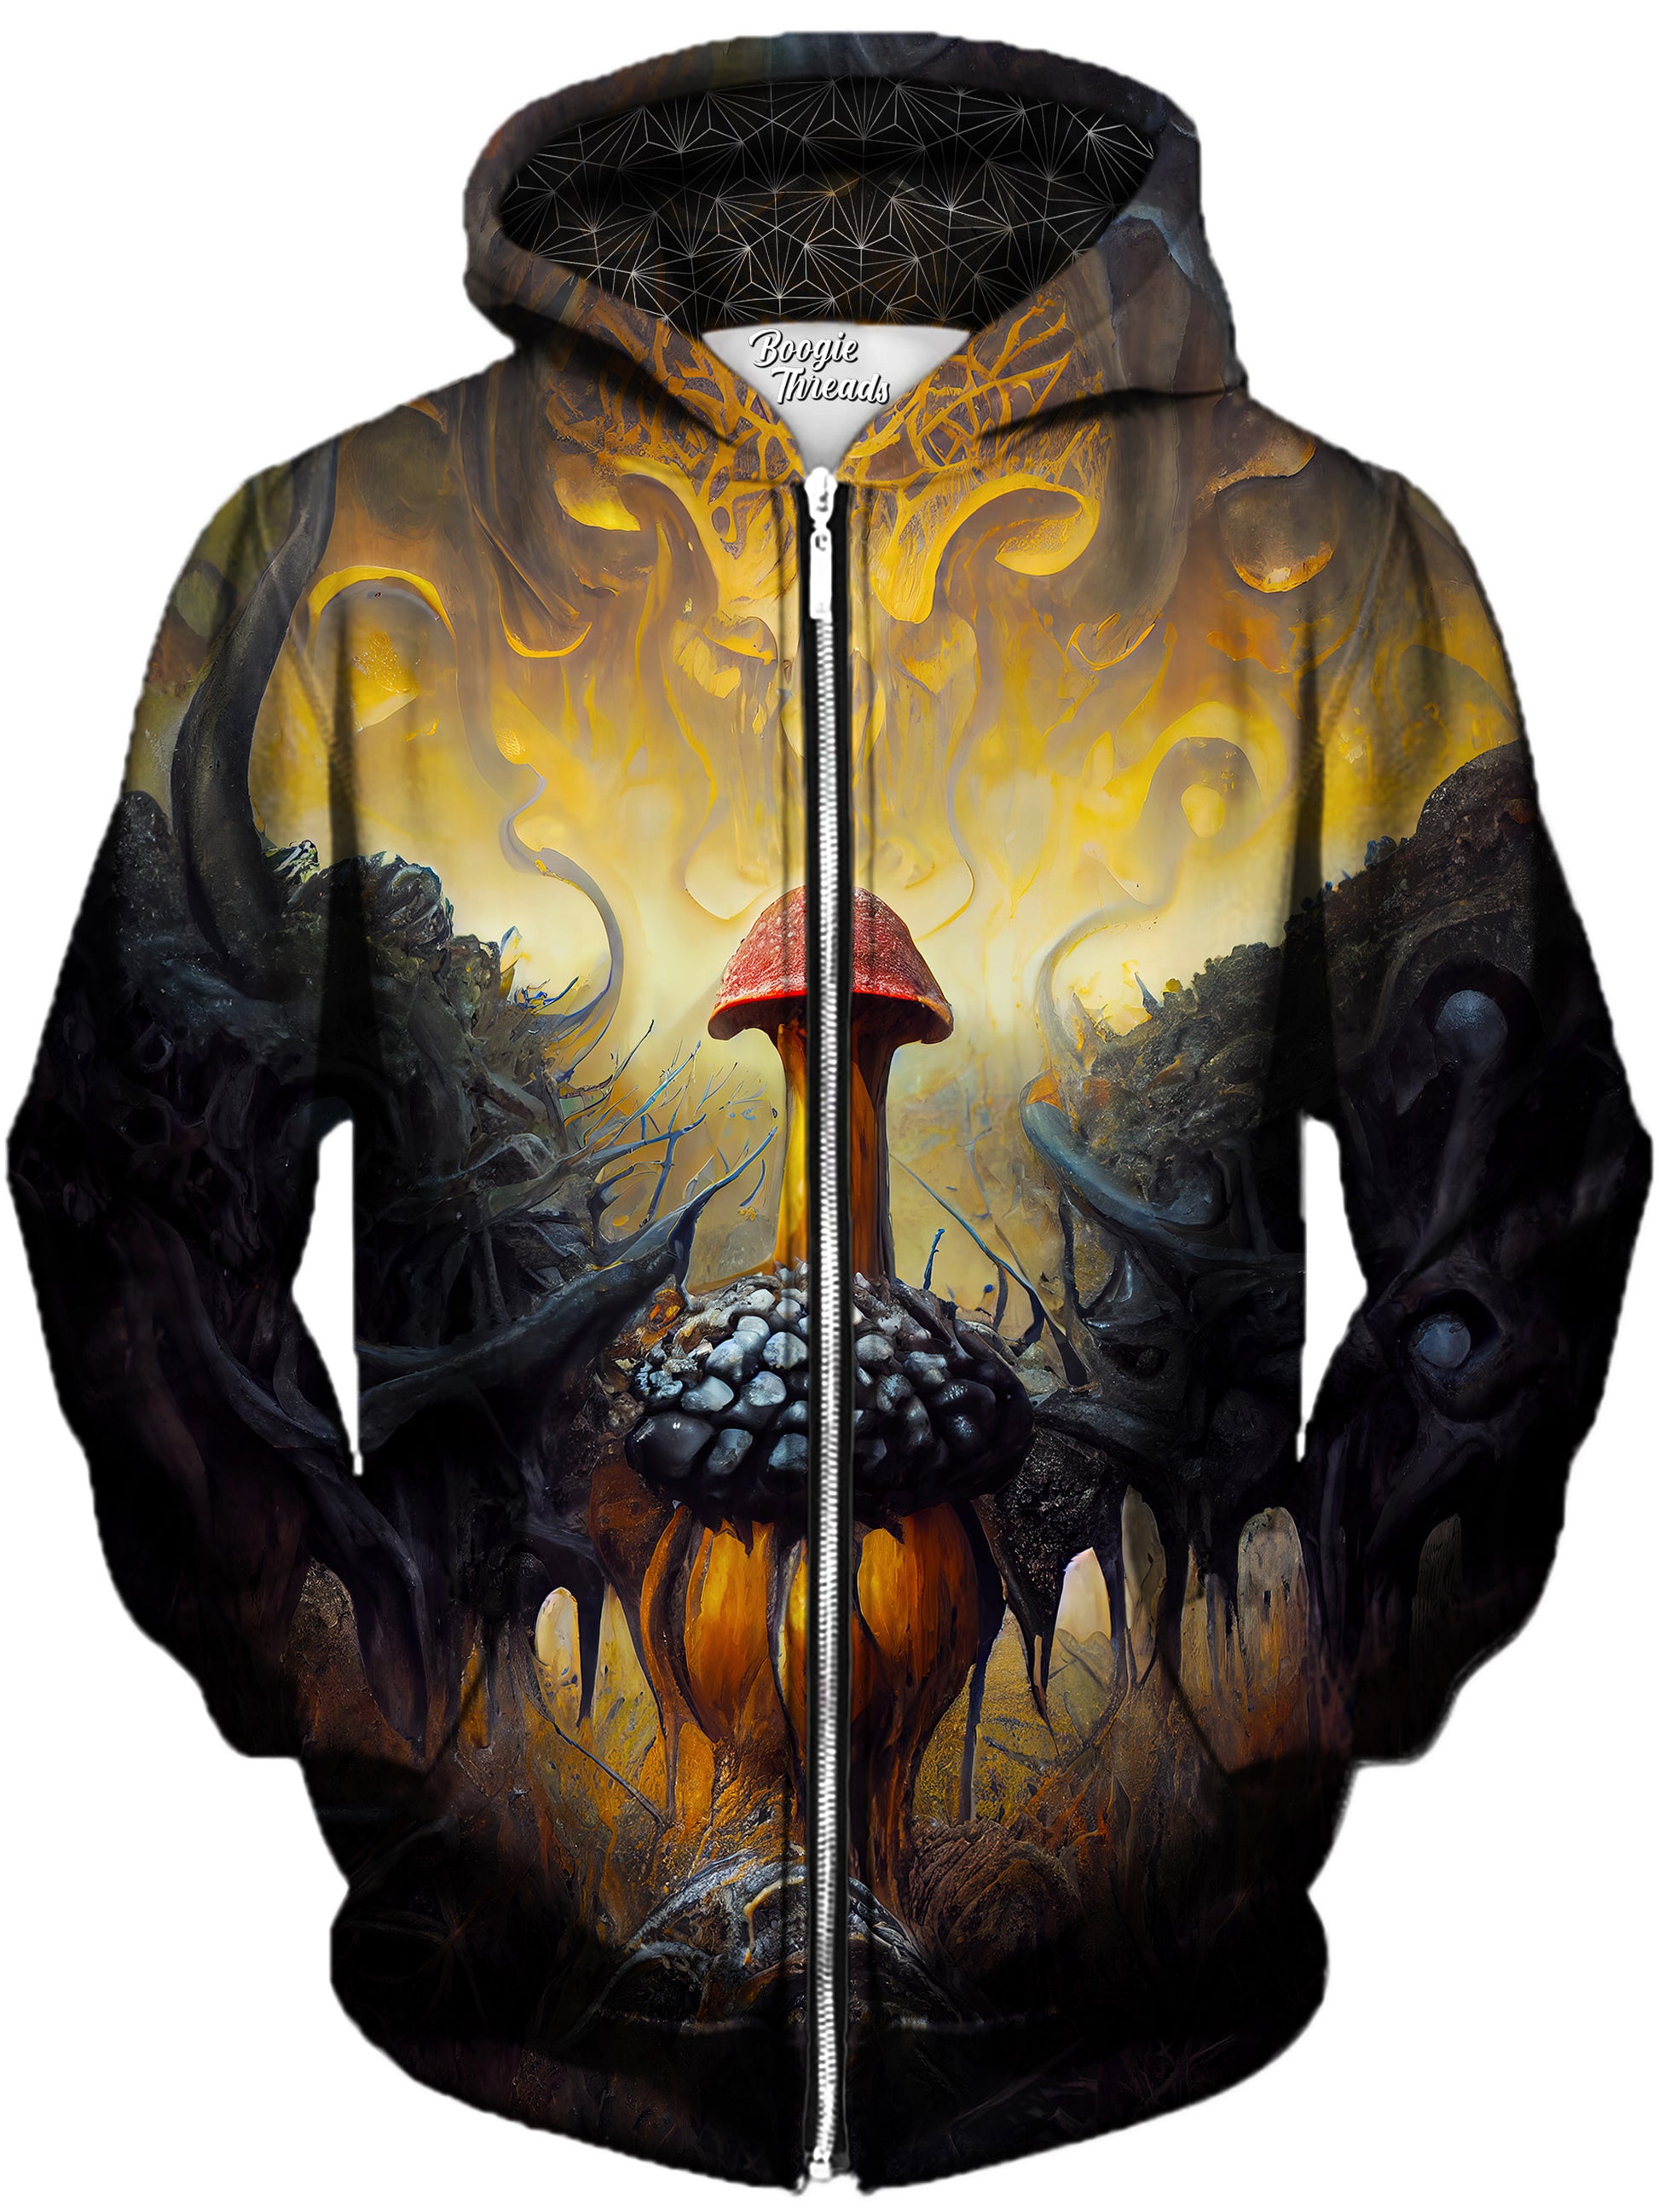 Bright Candles Unisex Zip-Up Hoodie, Gratefully Dyed, | iEDM